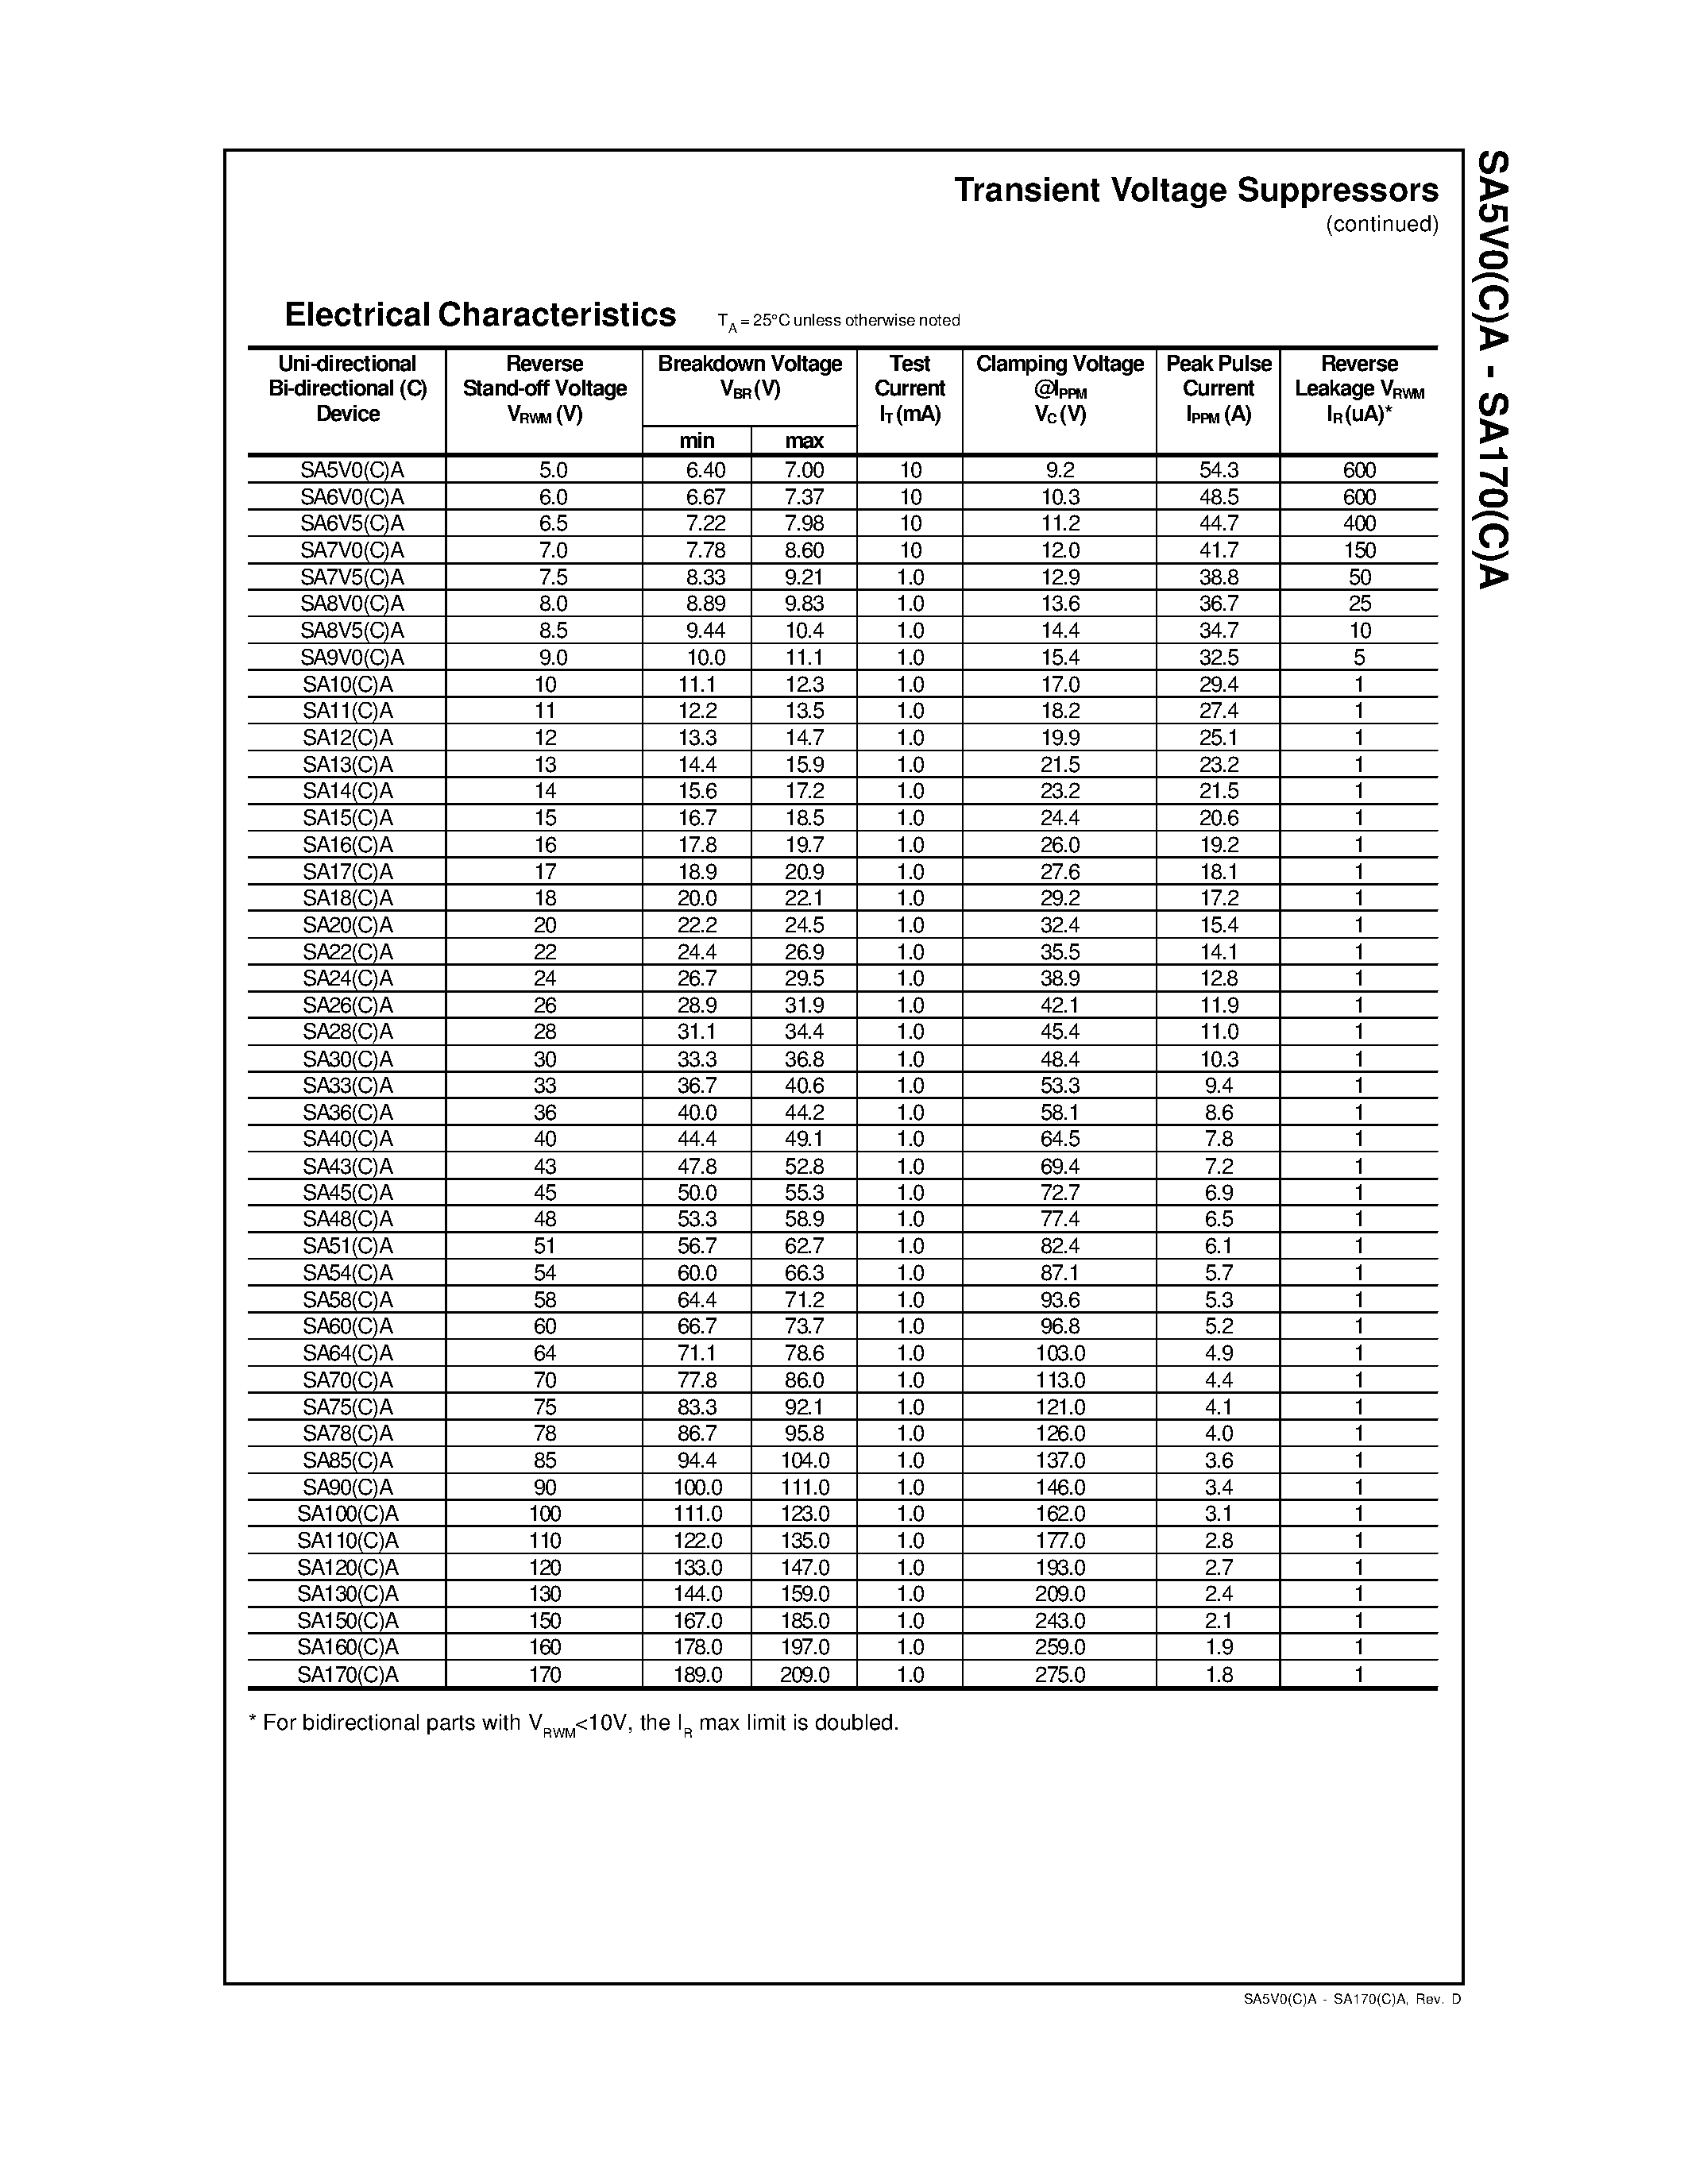 Datasheet SA36A - Transient Voltage Suppressors page 2